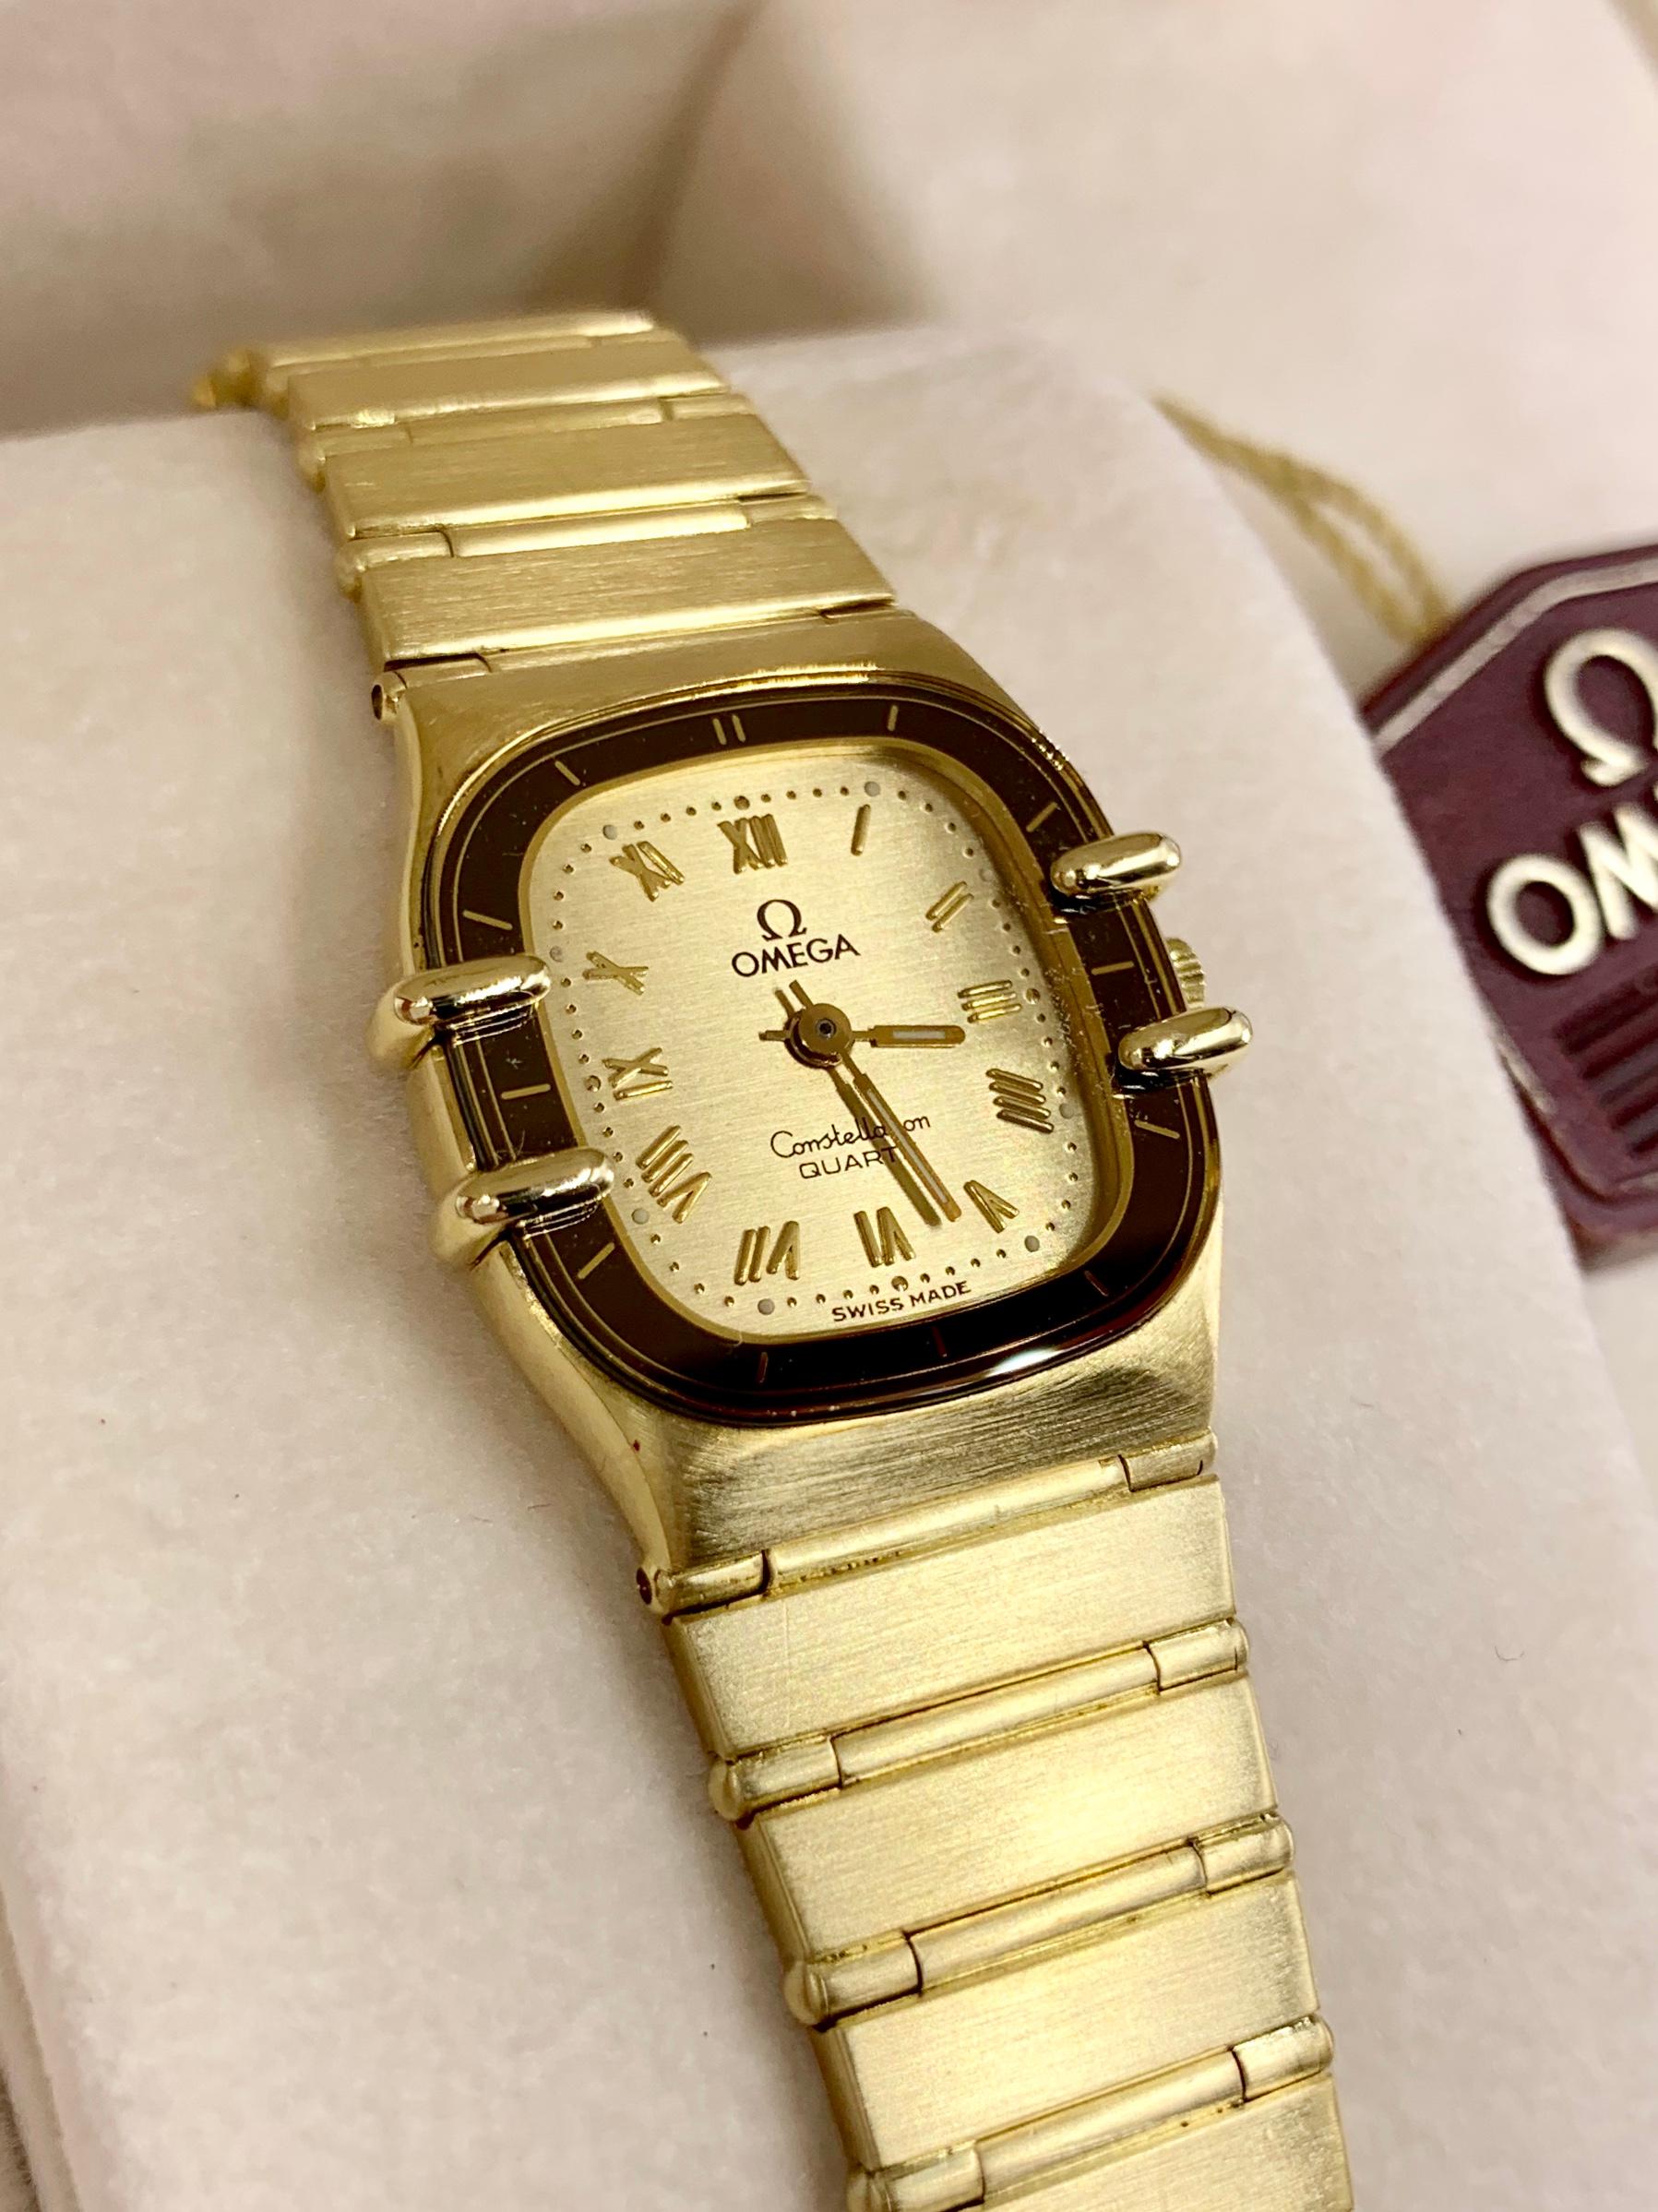 A wearable and chic all satin finished 18 karat yellow gold vintage Omega quartz timepiece from the iconic Constellation collection on the Manhattan bracelet. The cushion shaped case has a champagne satin dial with polished roman numerals and a